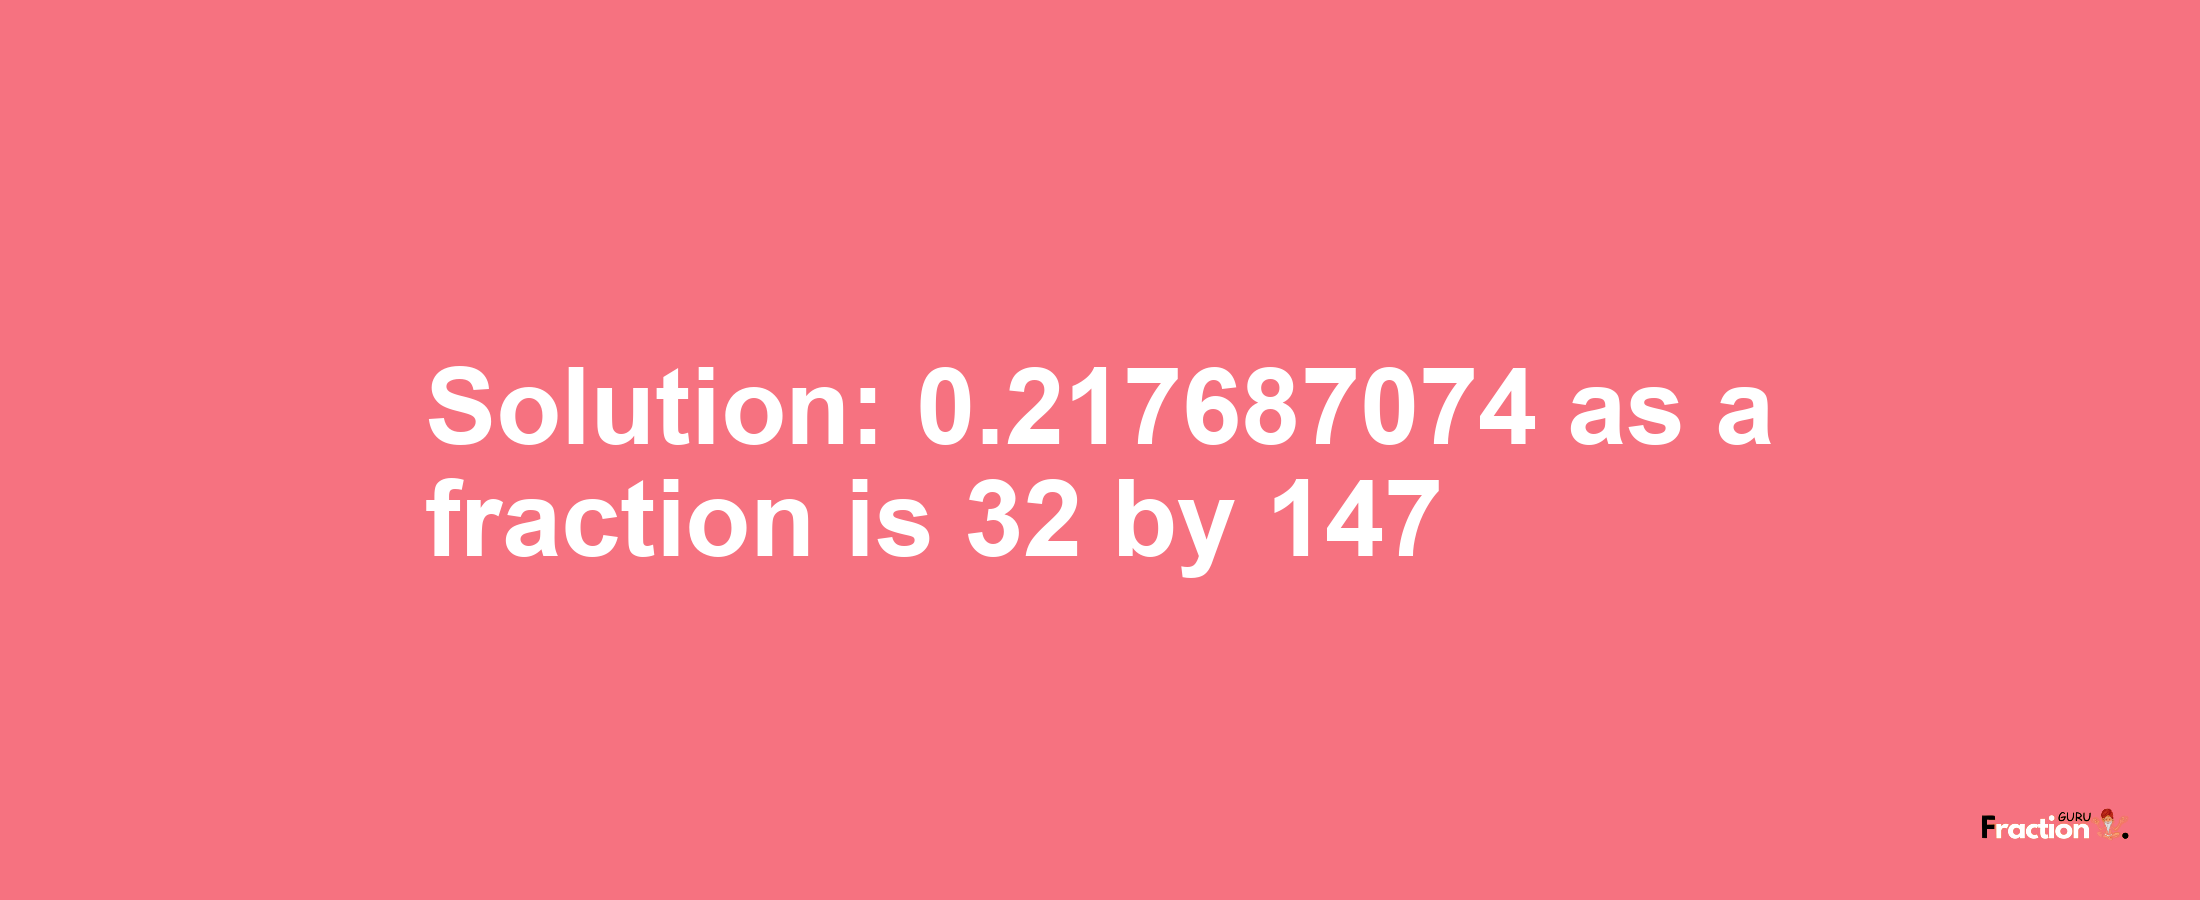 Solution:0.217687074 as a fraction is 32/147